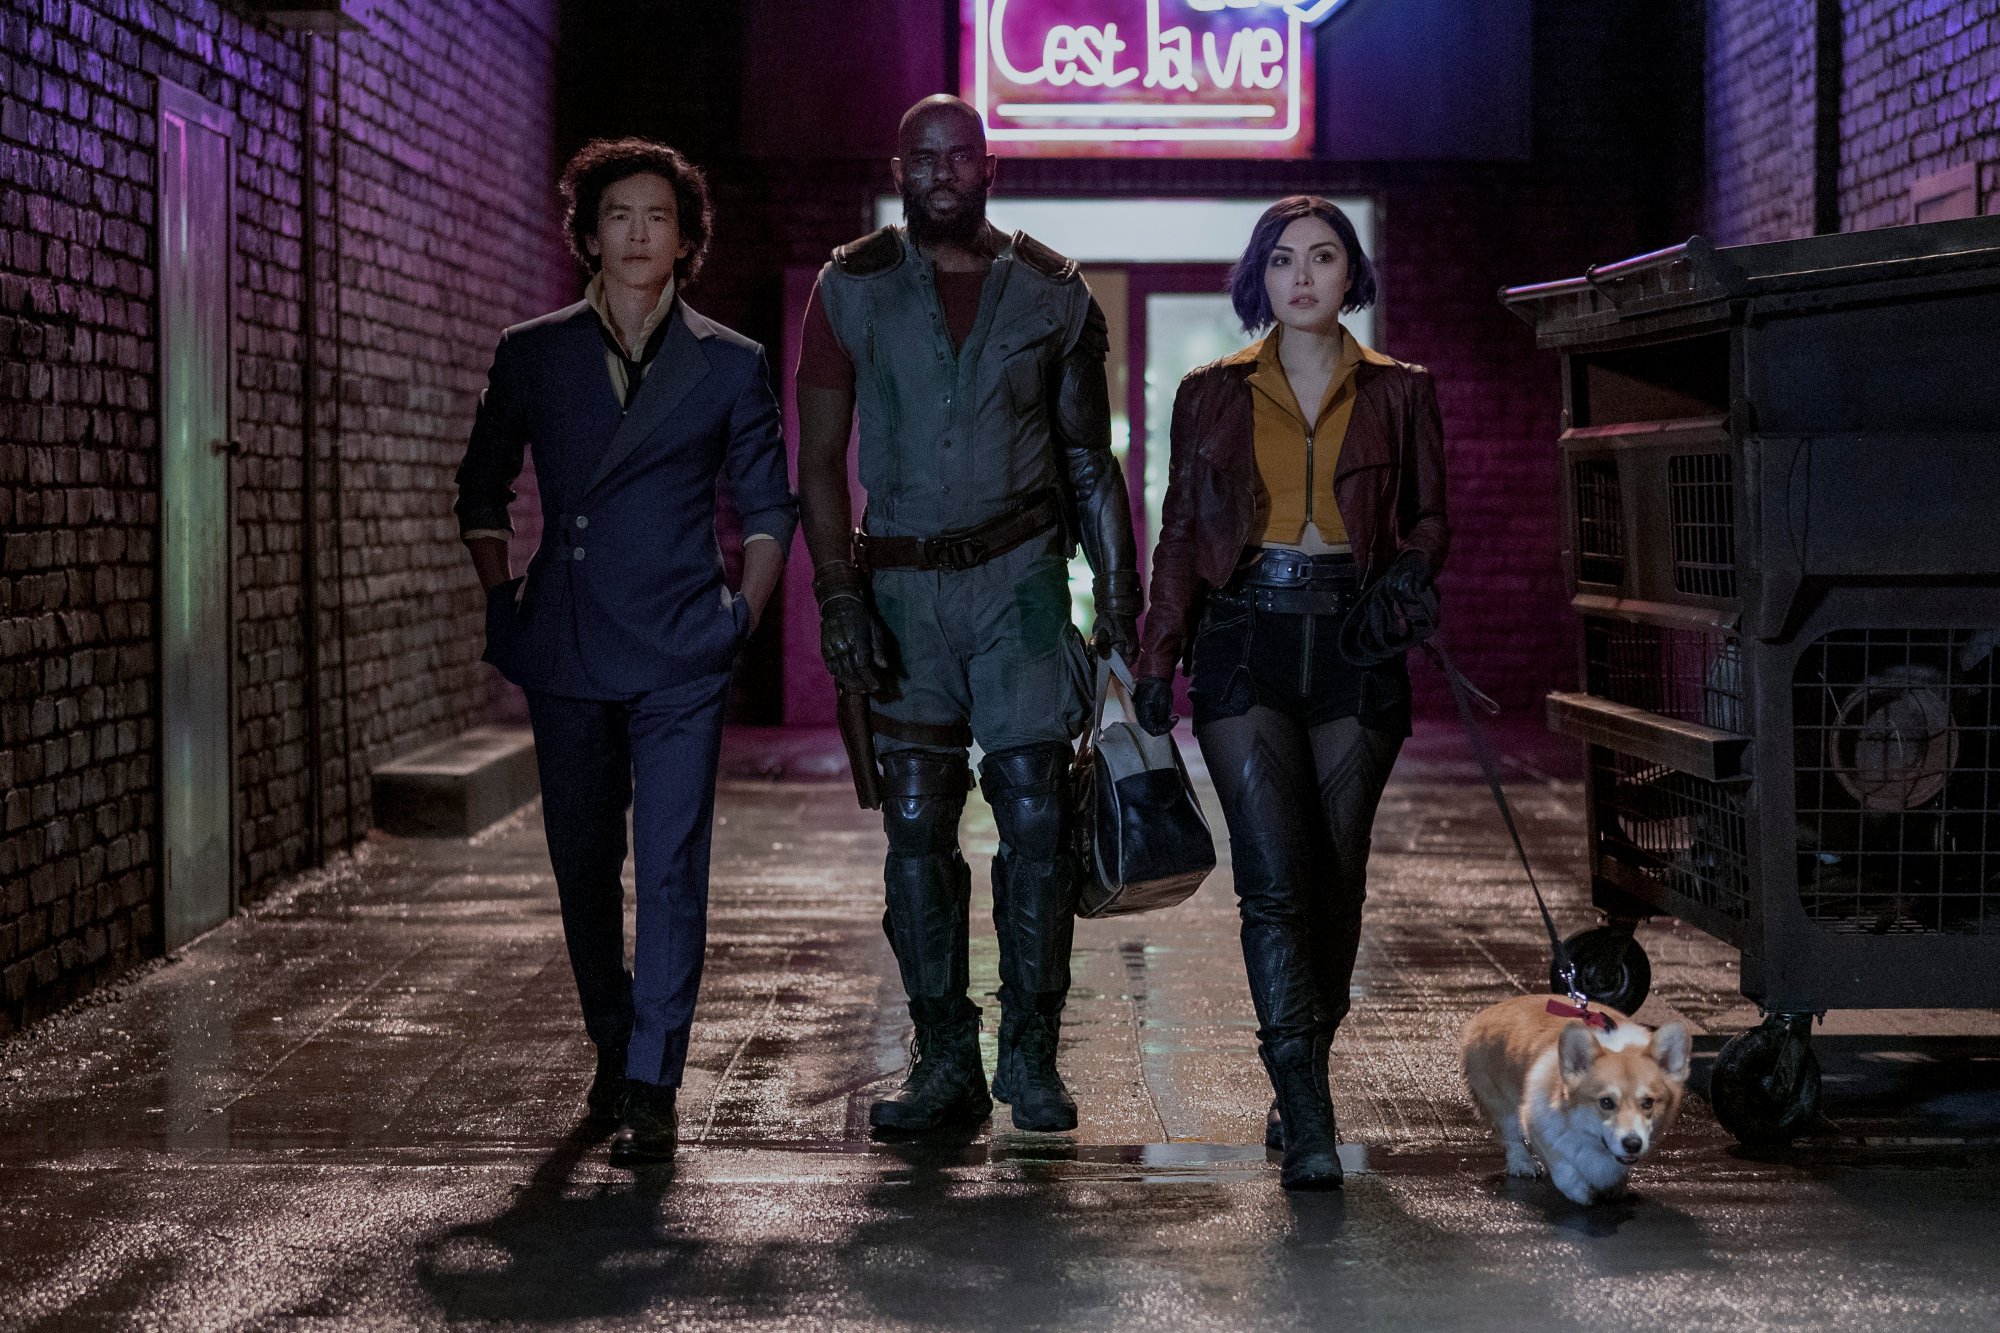 John Cho, Mustafa Shakir, and Daniella Pineda as Spike Spiegel, Jet Black, and Faye Valentine in Netflix's live-action 'Cowboy Bebop.' They're walking side by side with Ein the corgi next to them.